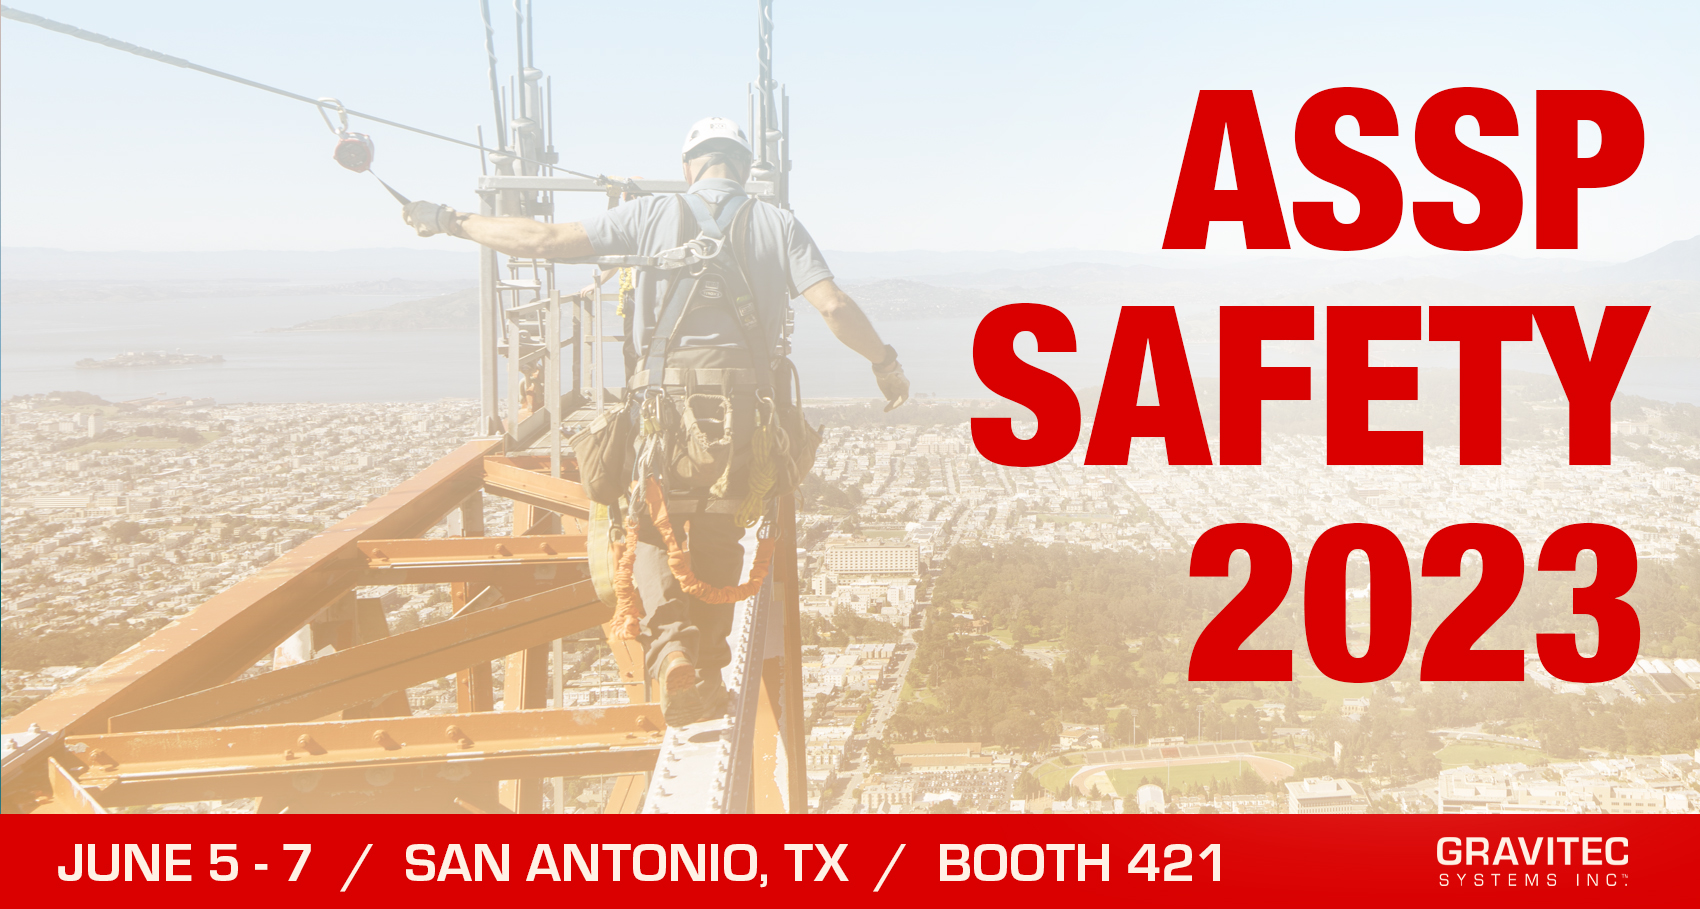 A picture of a worker safely tethered and walking across a high beam with text that reads "ASSP Safety 2023, June 5-7, San Antonio, TX, Booth 421, Gravitec Systems, Inc.